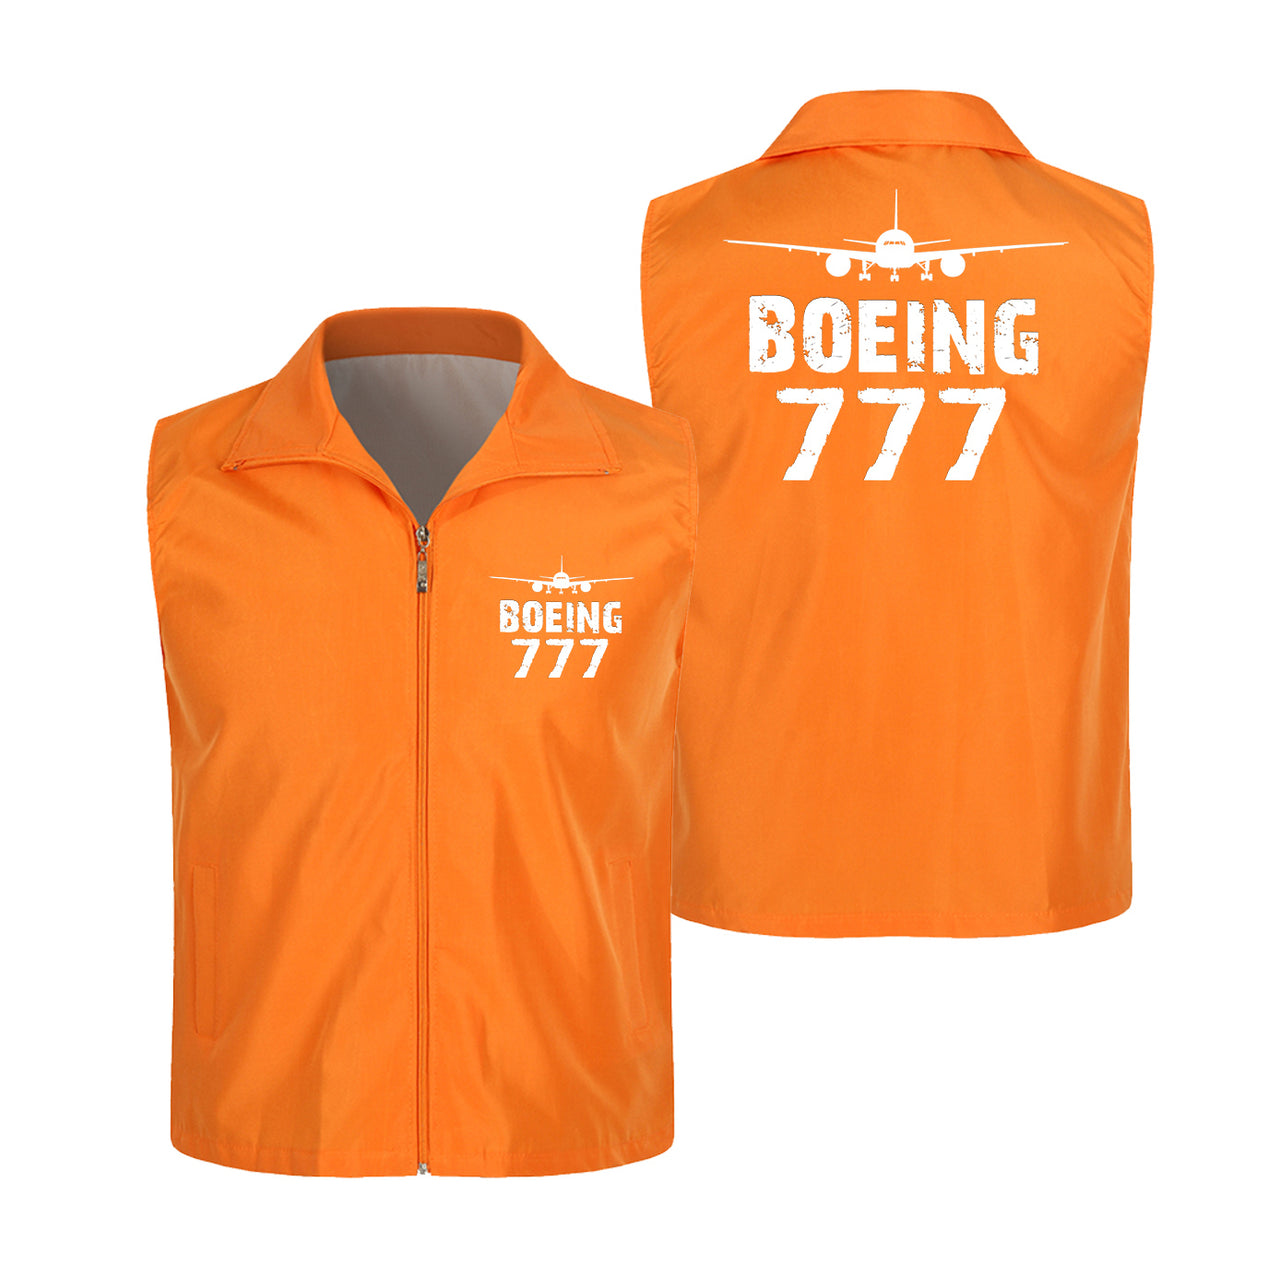 Boeing 777 & Plane Designed Thin Style Vests